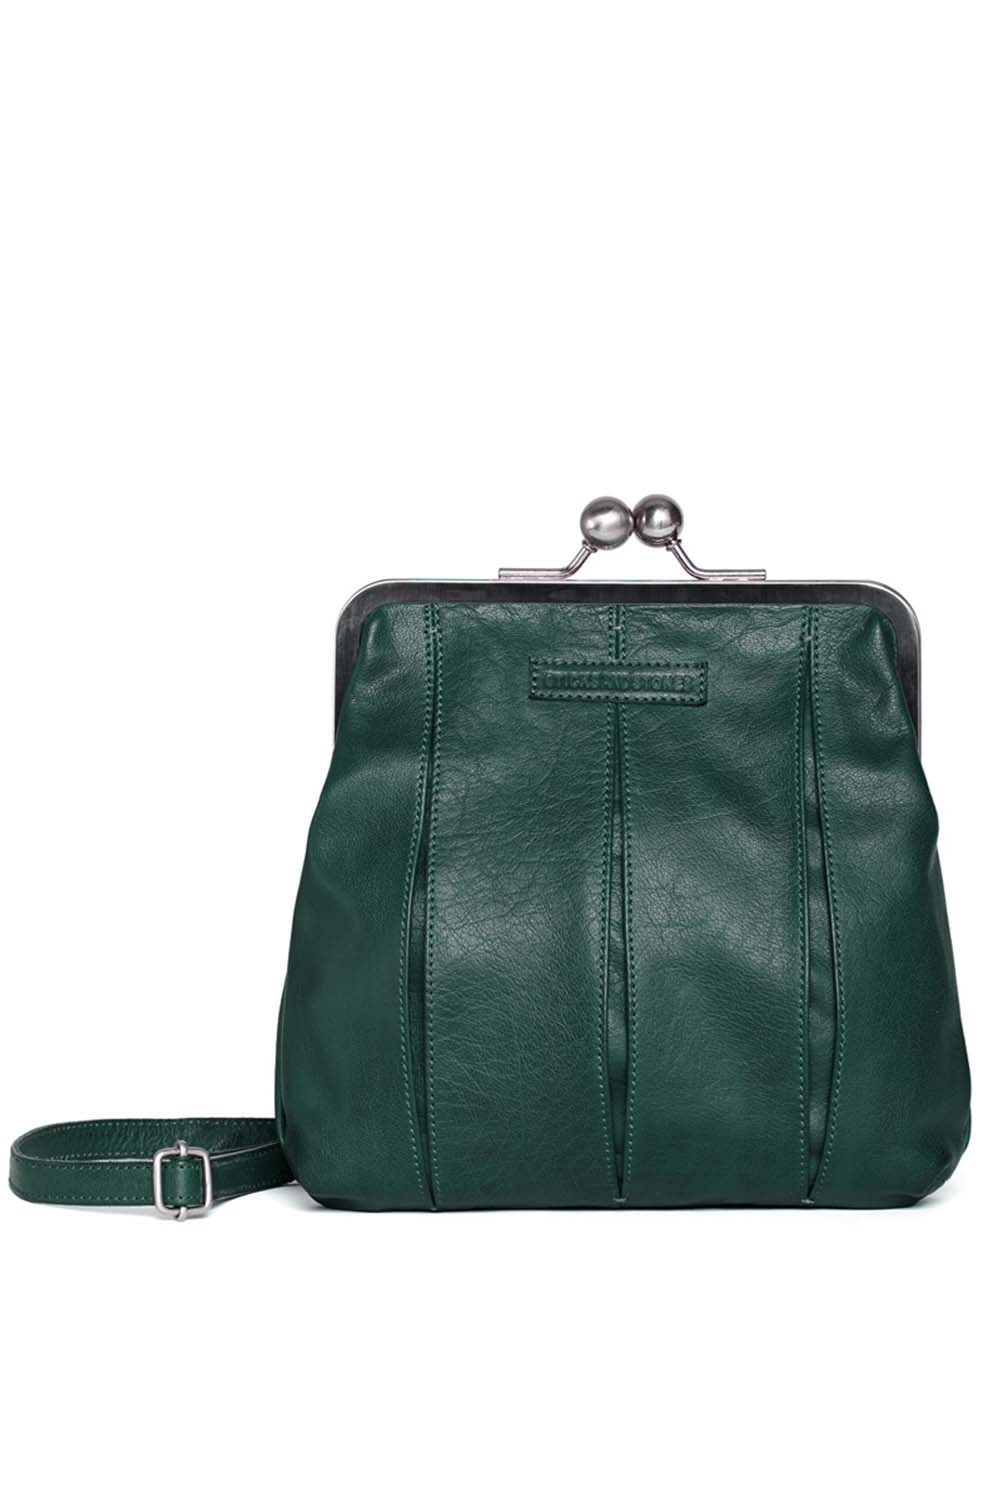 Luxembourg bag - Buff Washed Pine green